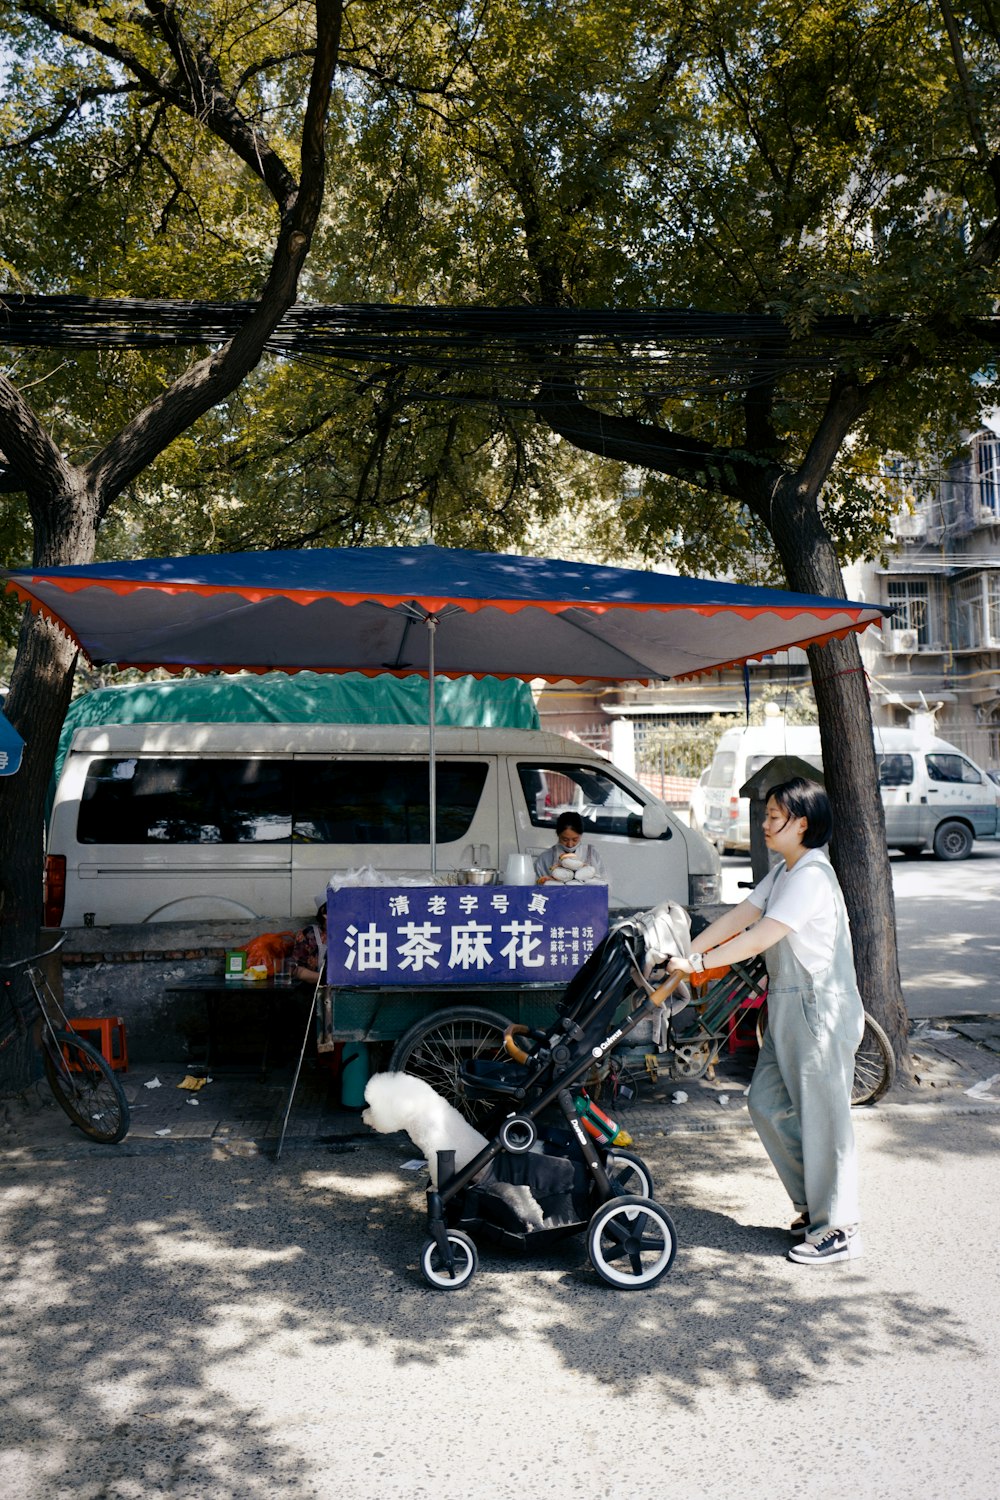 a woman standing next to a baby carriage under a canopy